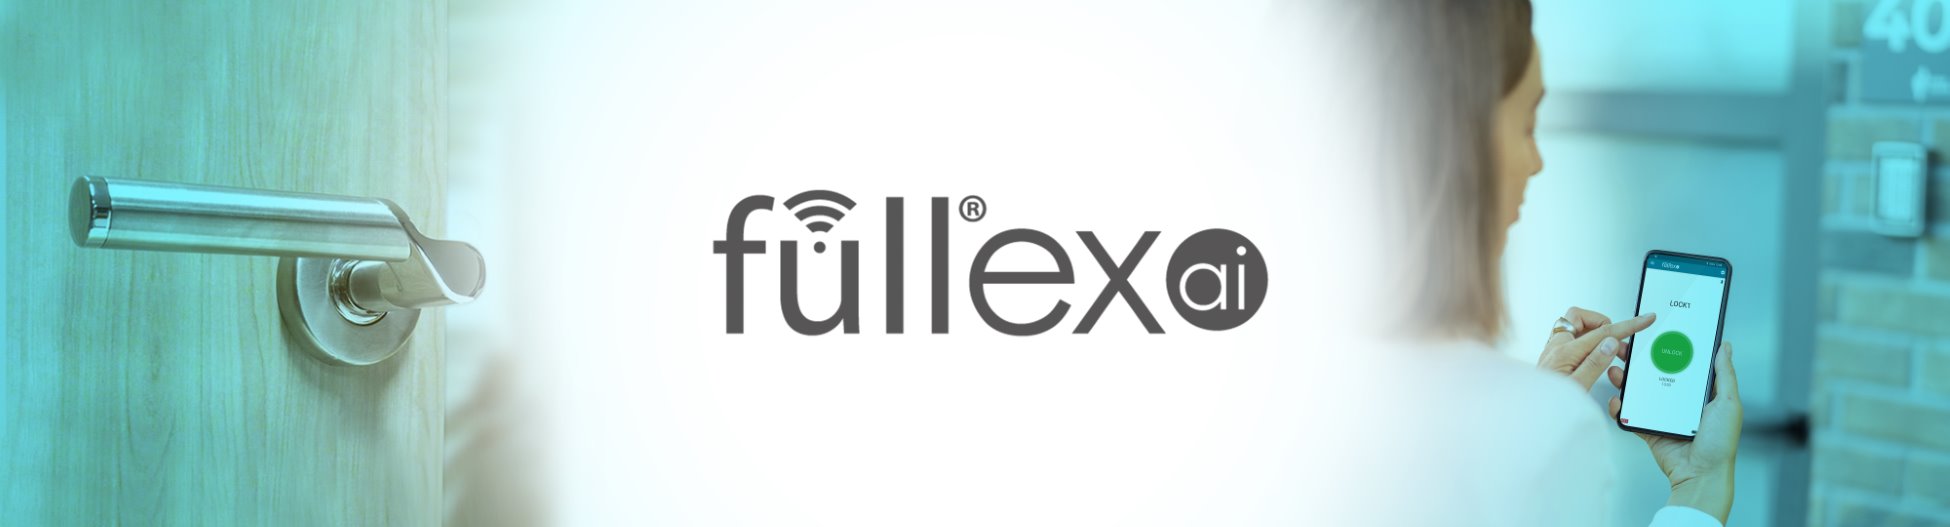 Fullex ai - UAP Ltd - Door Hardware and Security Products